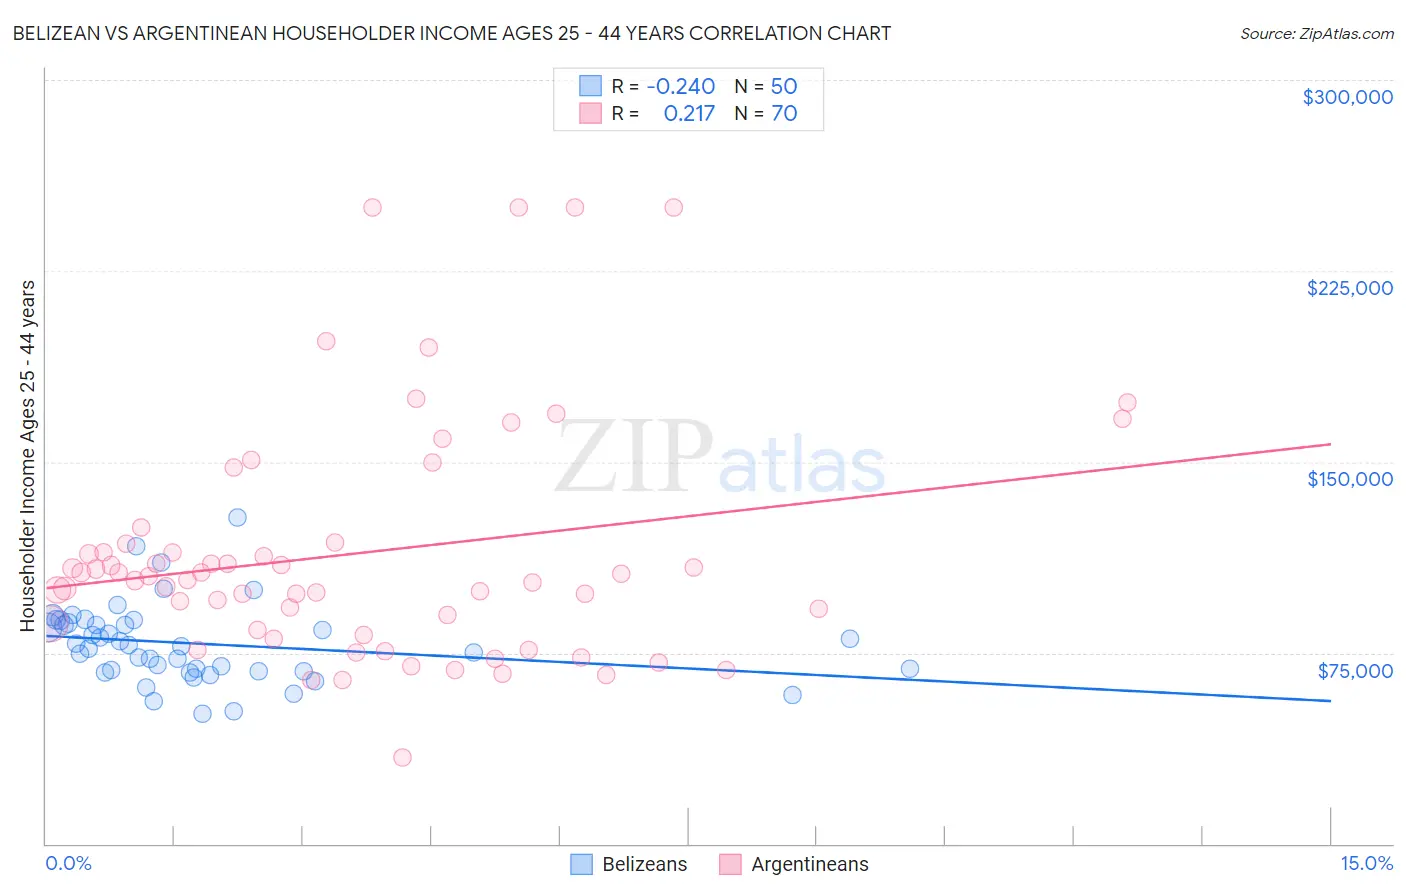 Belizean vs Argentinean Householder Income Ages 25 - 44 years